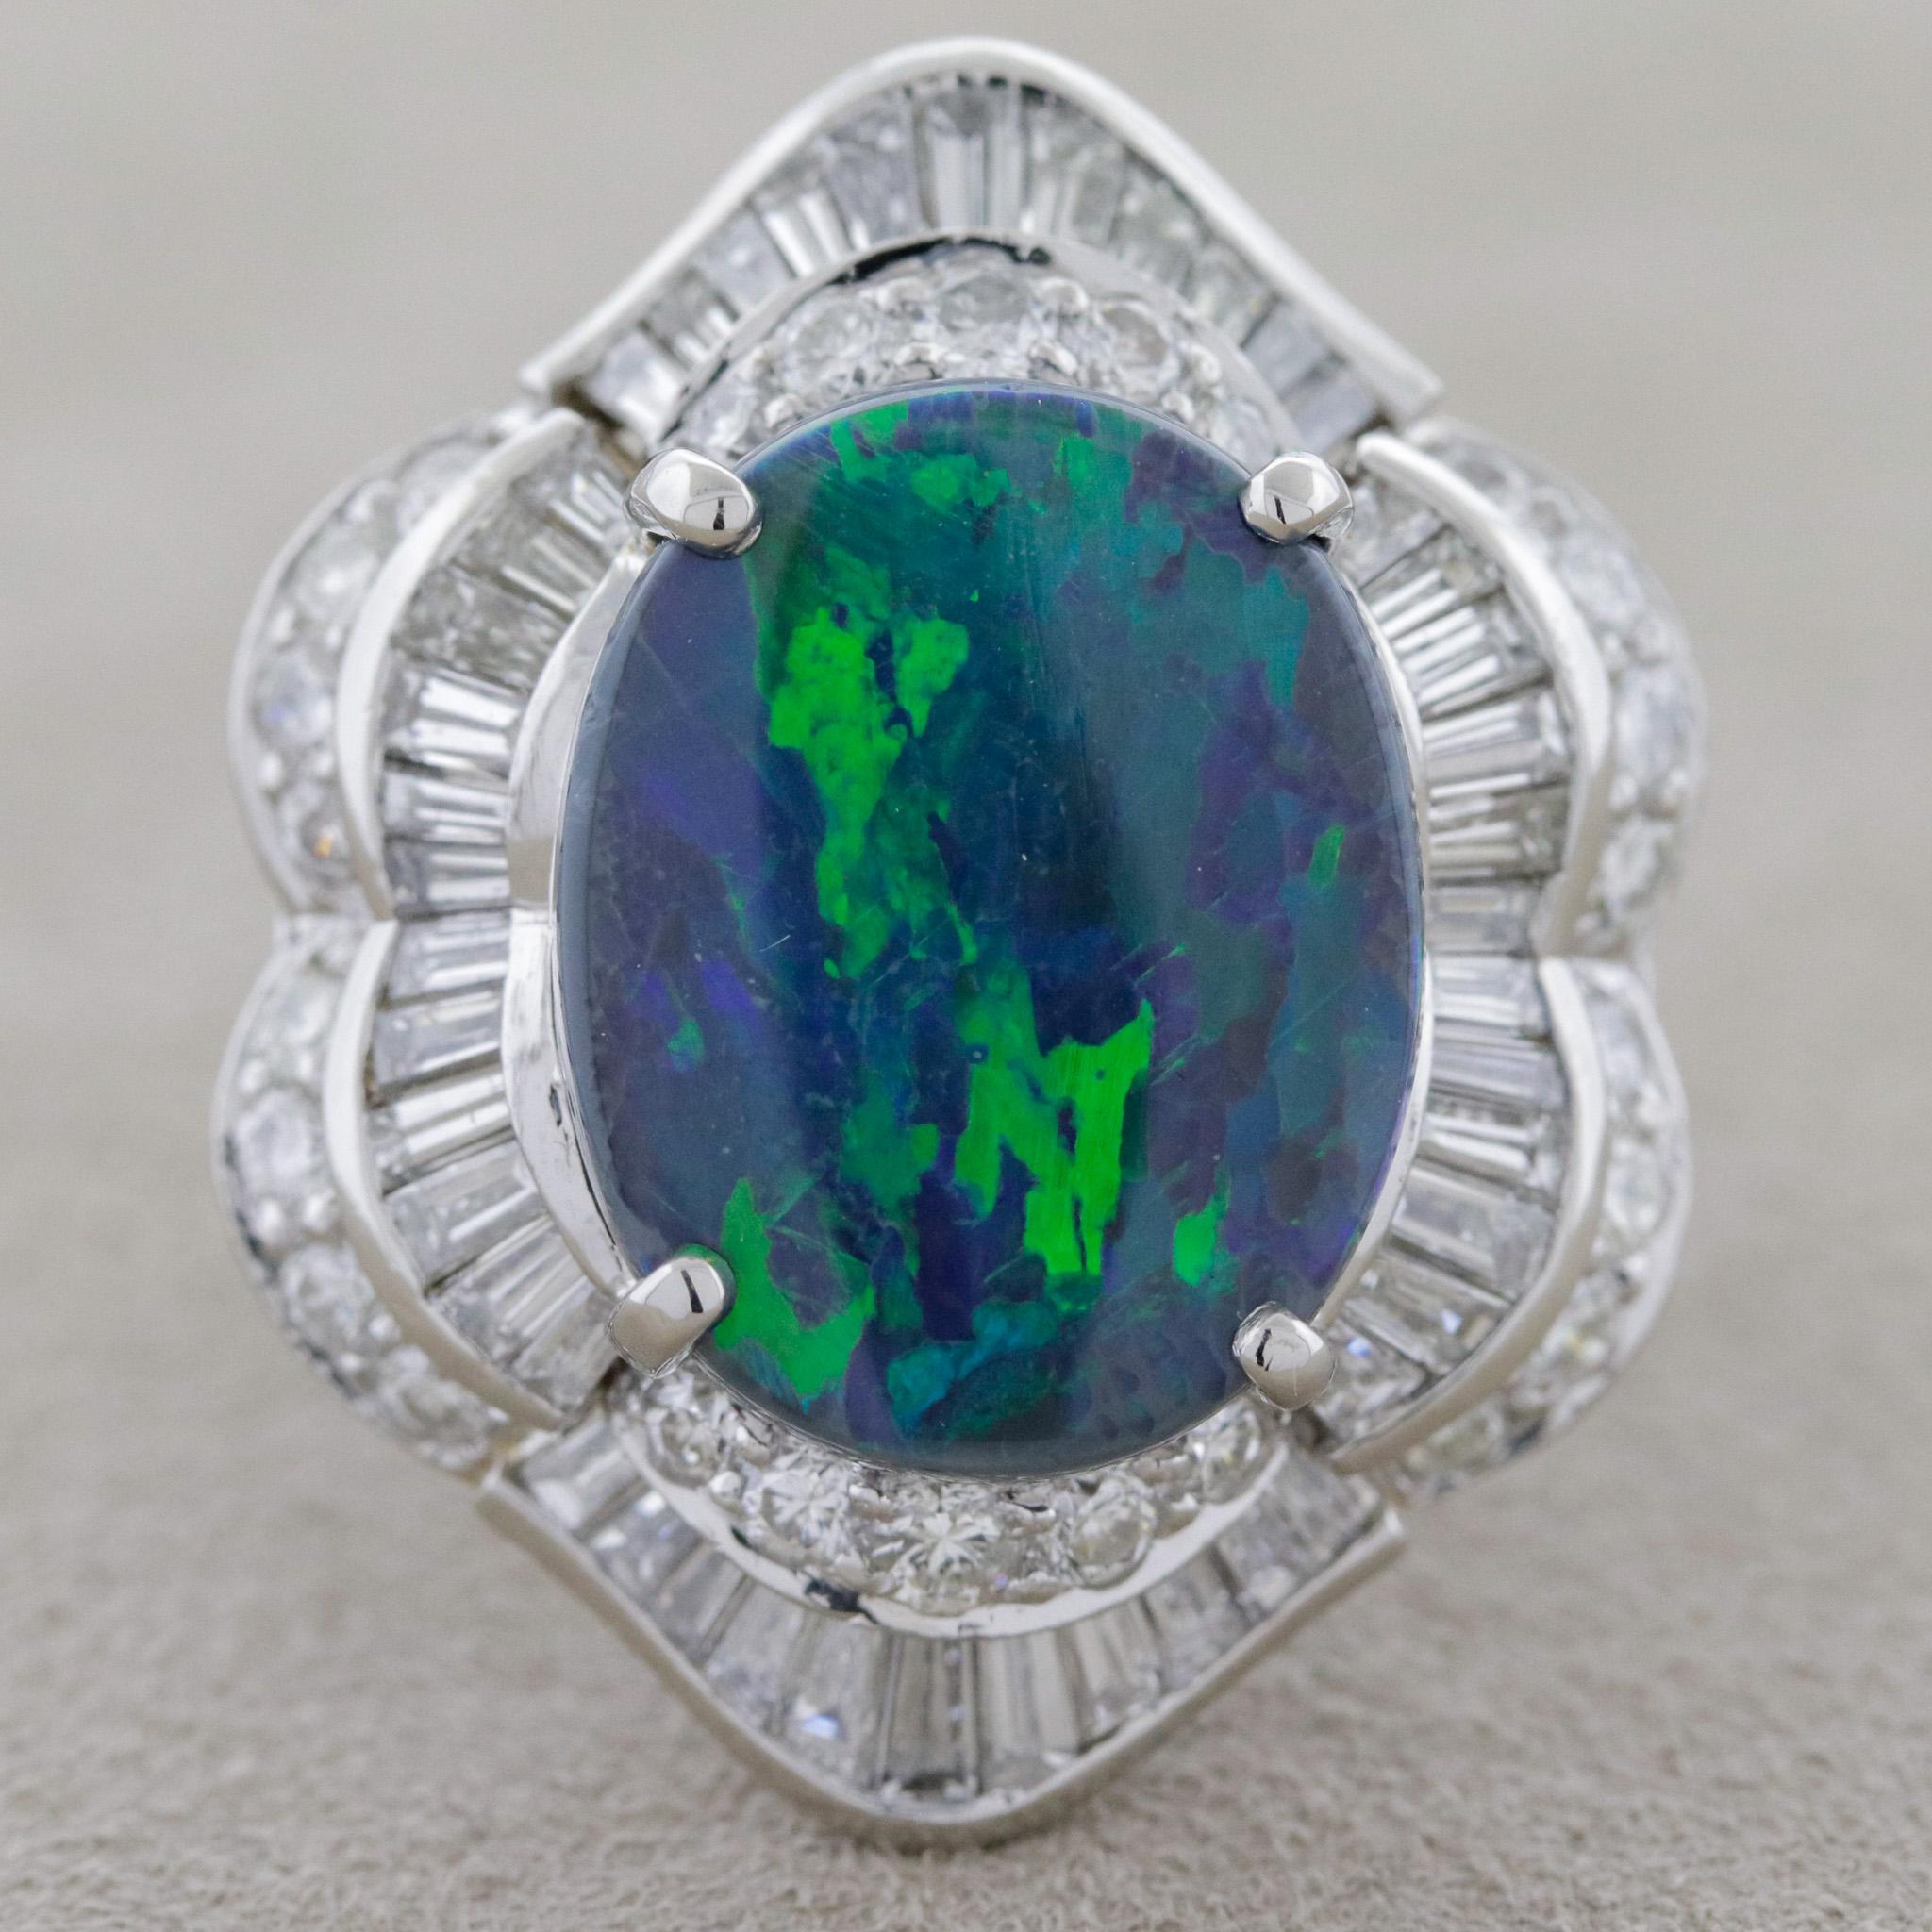 A large and impressive cocktail ring featuring a fine and gemmy Australian black opal! The opal weighs 5.80 carats and has excellent play-of-color and large prominent bright flashes of green and blue emanate from the stones surface. It is accented